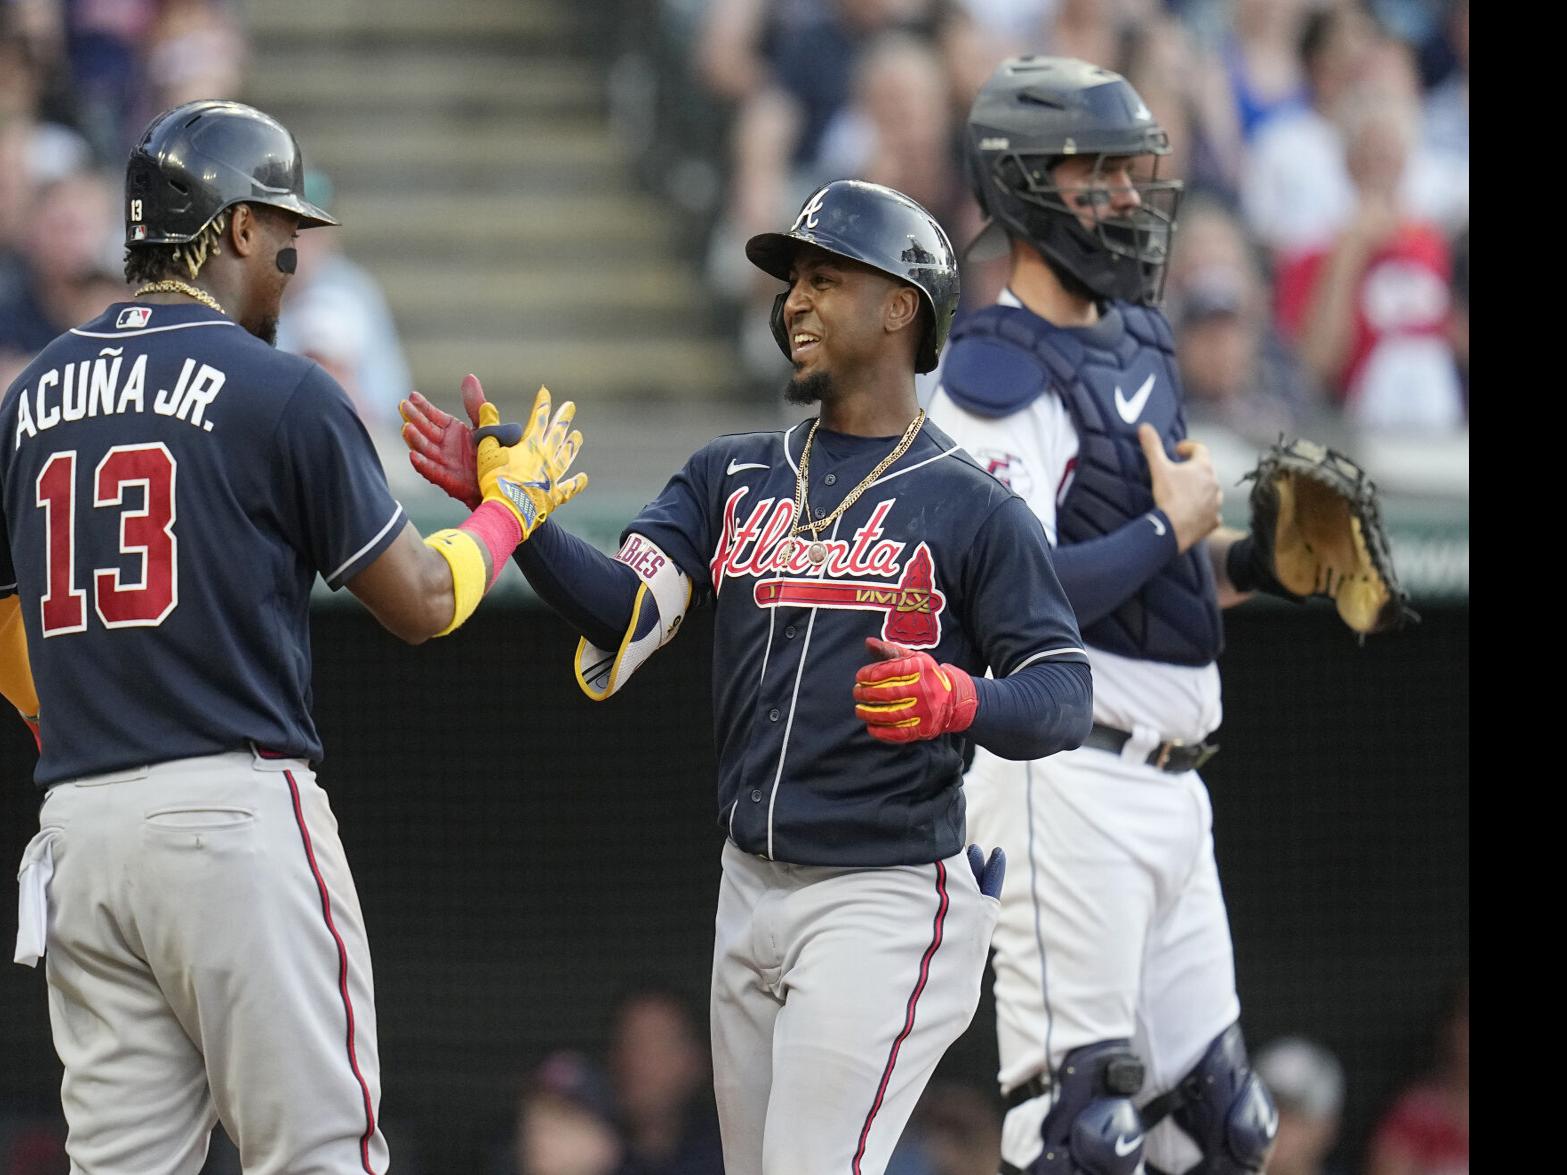 Sean Murphy's home run lifts Braves to historic mark, on pace to